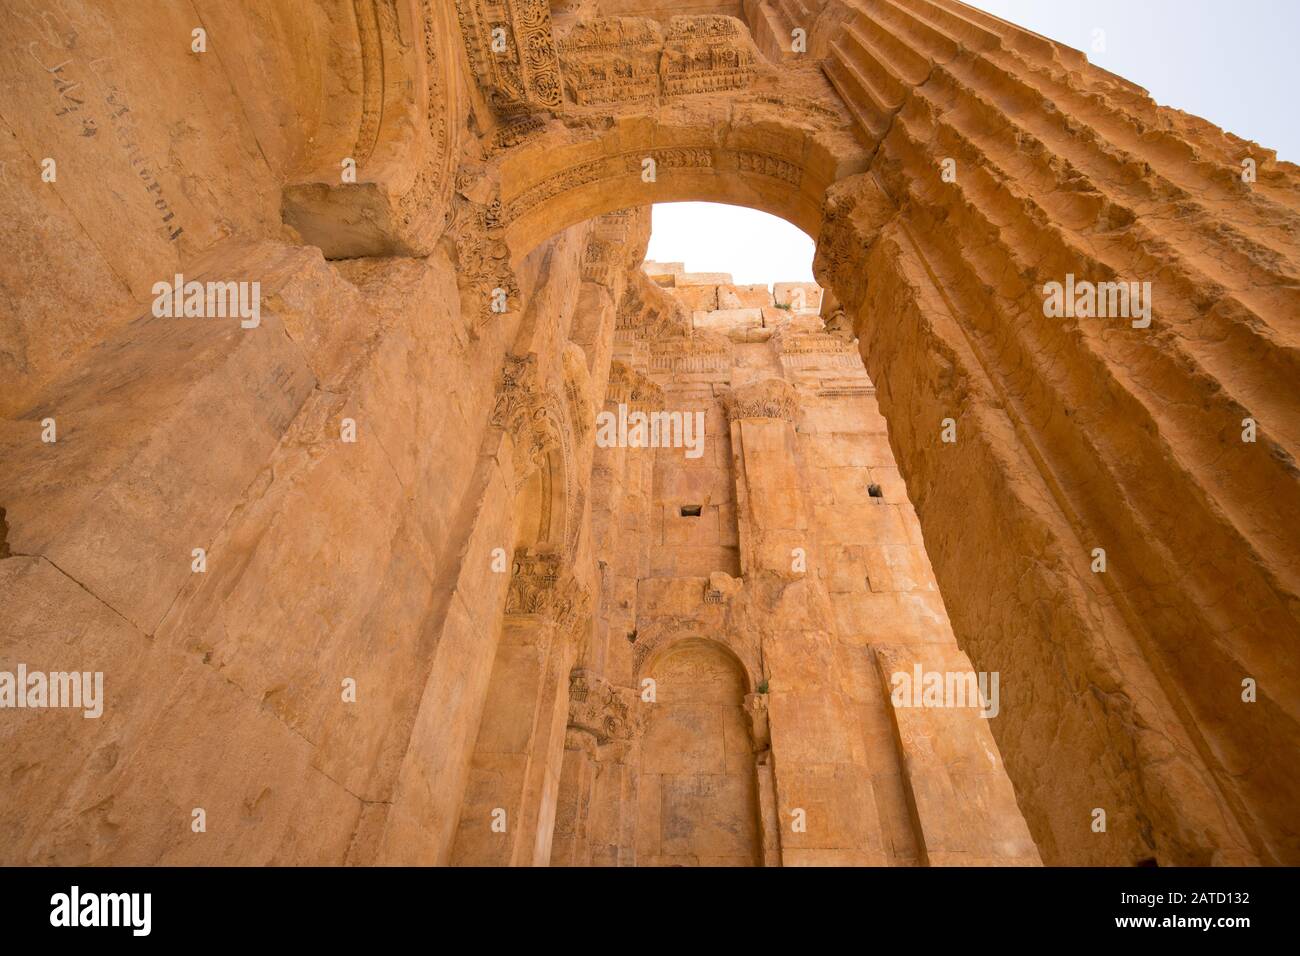 The Temple of Bacchus. The ruins of the Roman city of Heliopolis or Baalbek in the Beqaa Valley. Baalbek, Lebanon - June, 2019 Stock Photo